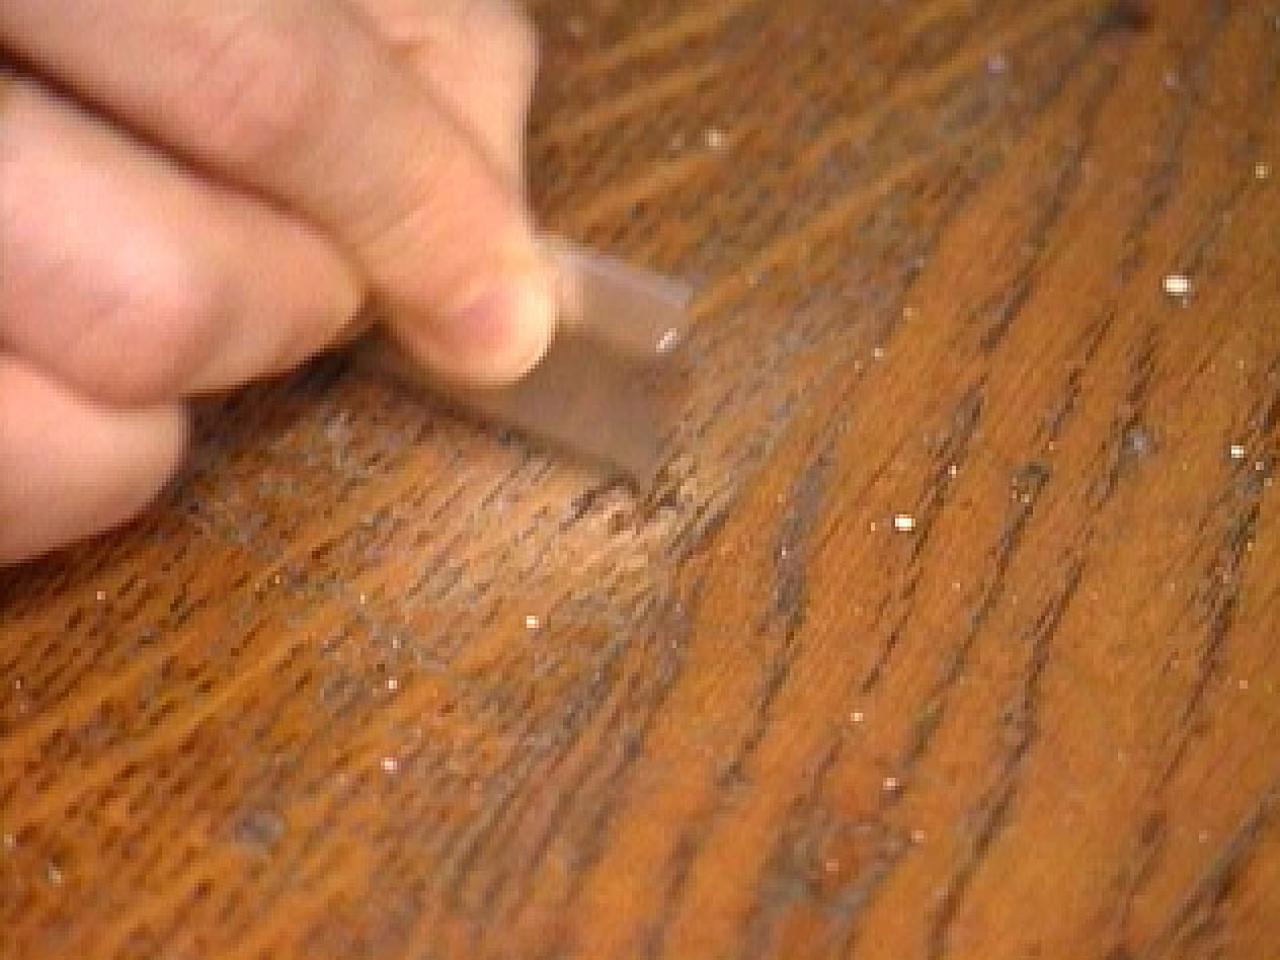 Remove Burn Marks On A Hardwood Floor, How To Remove White Marks From Laminate Flooring